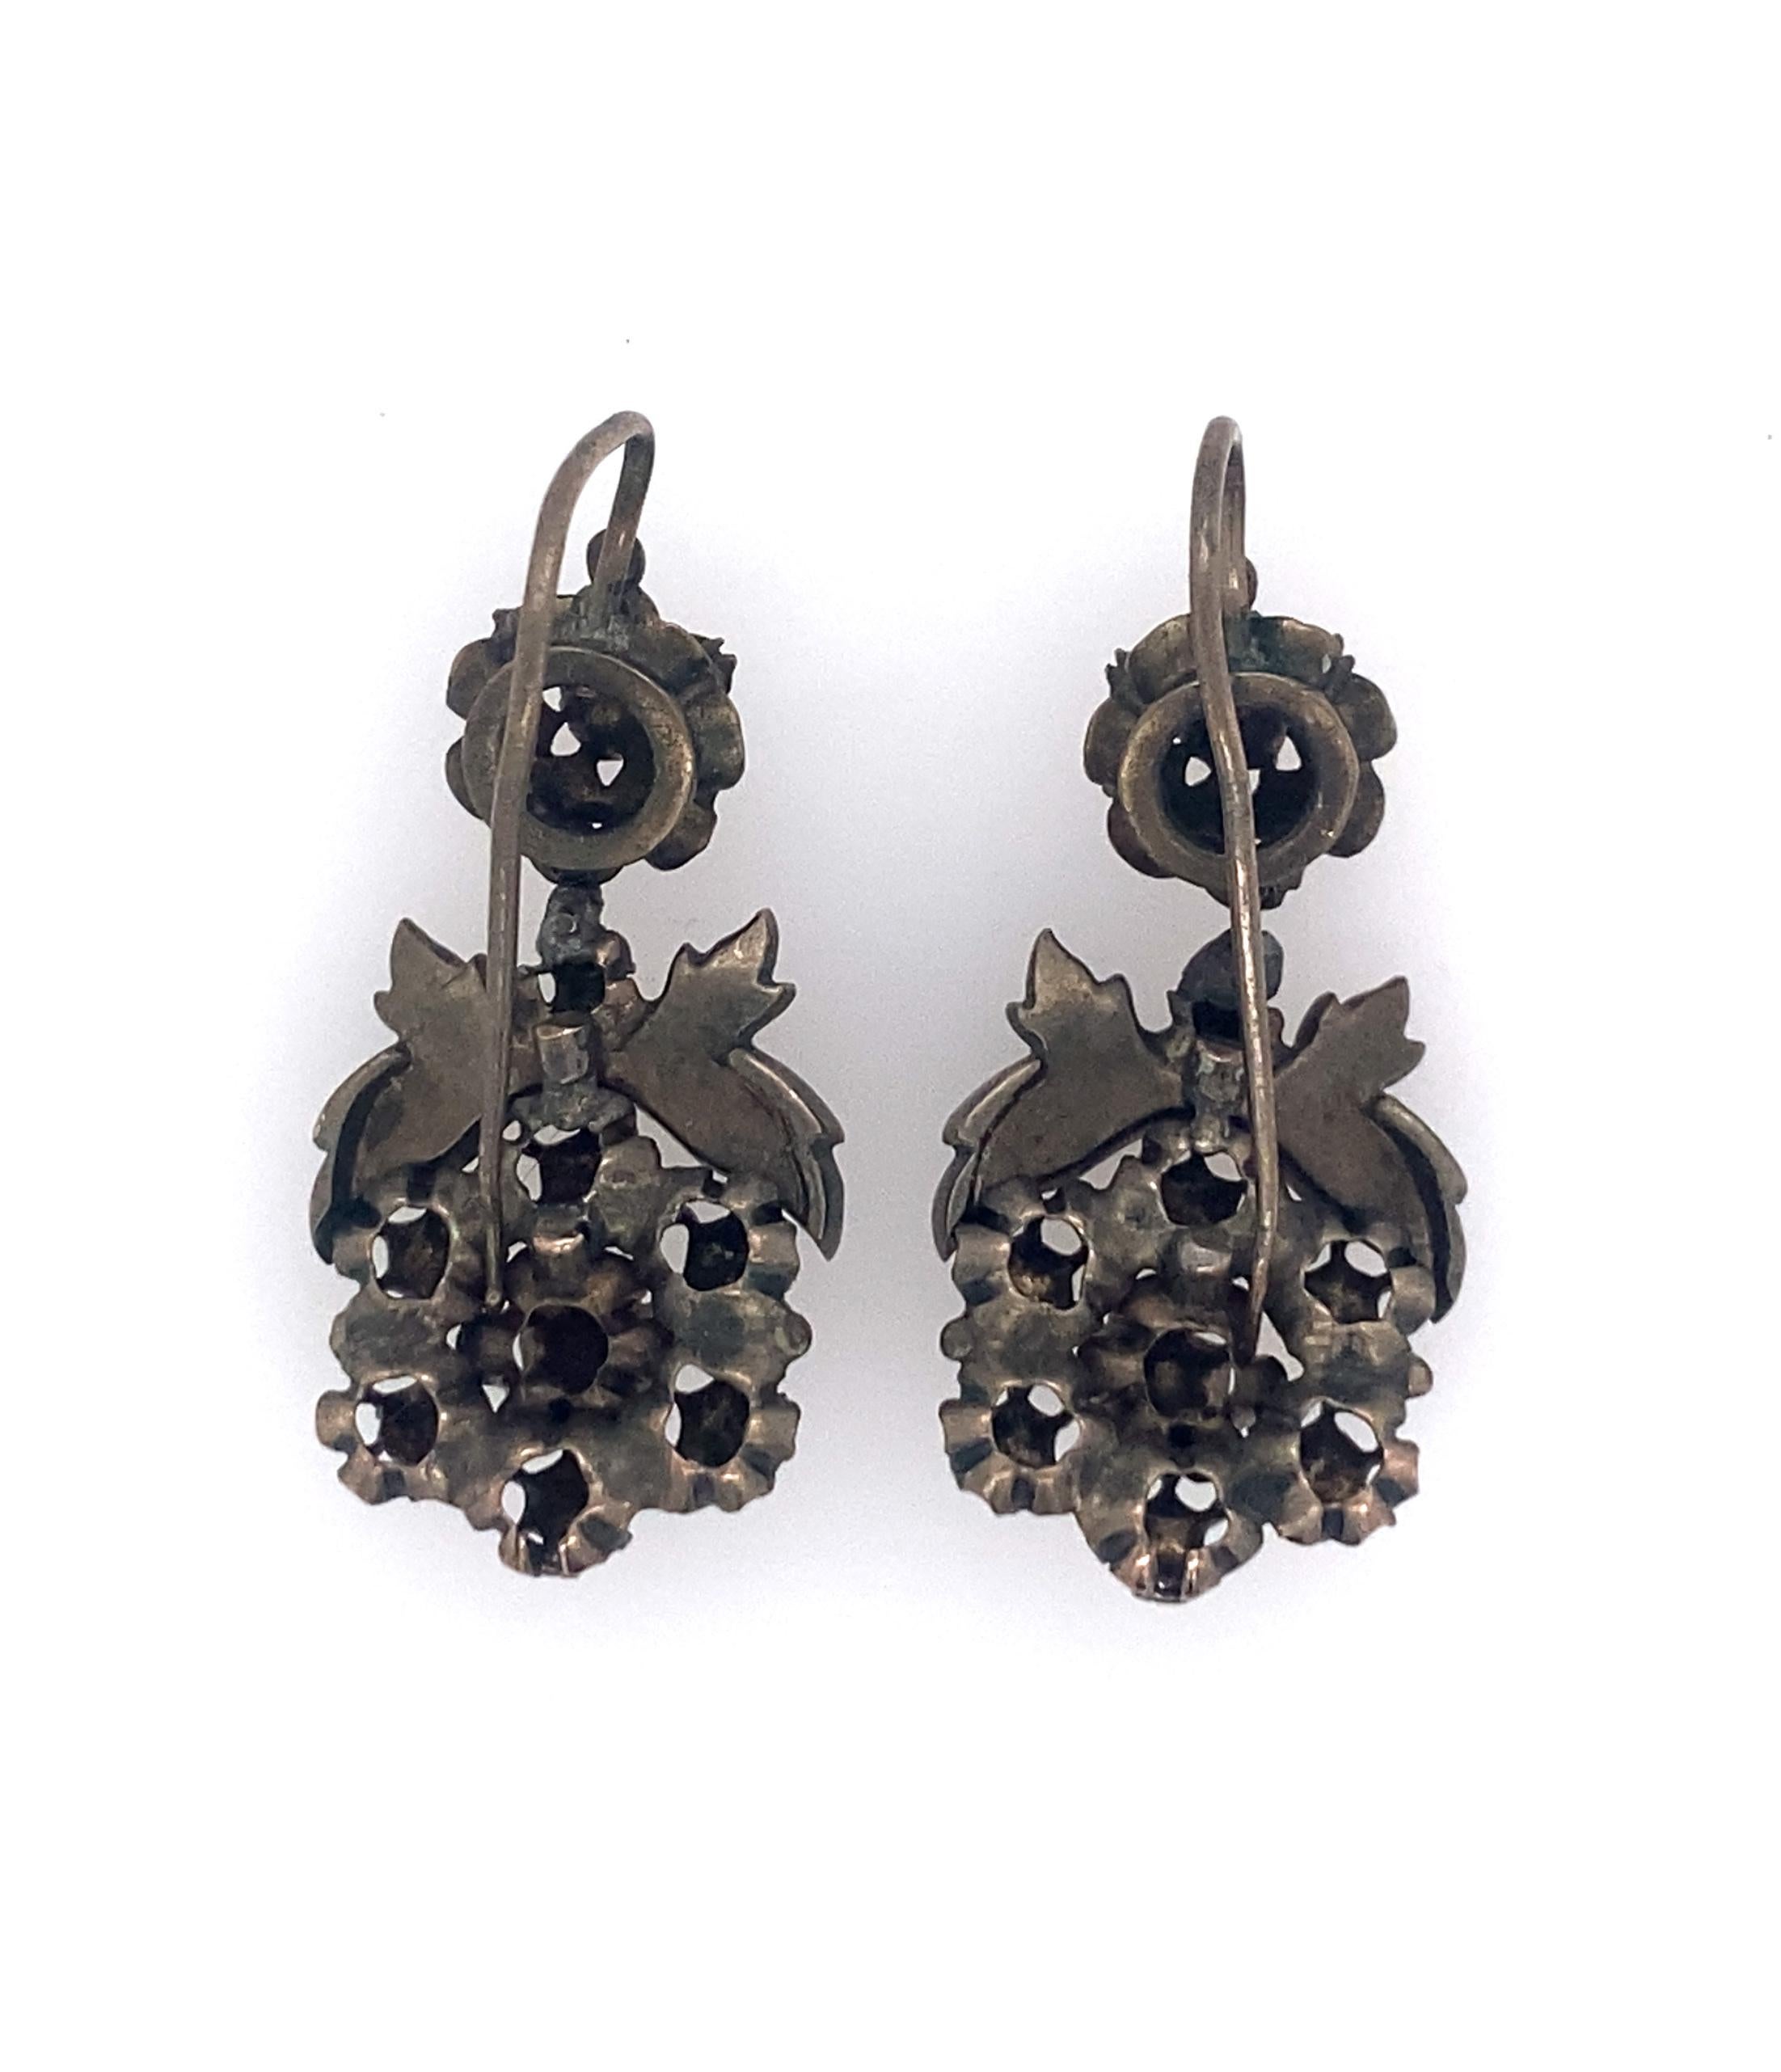 Georgian dated 1750 - 1800 Silver rose cut diamond earrings. Approx. 1 cts of diamonds. 
Weight is ap 6.4 dwts, Length including hooks is 1.44 inches.